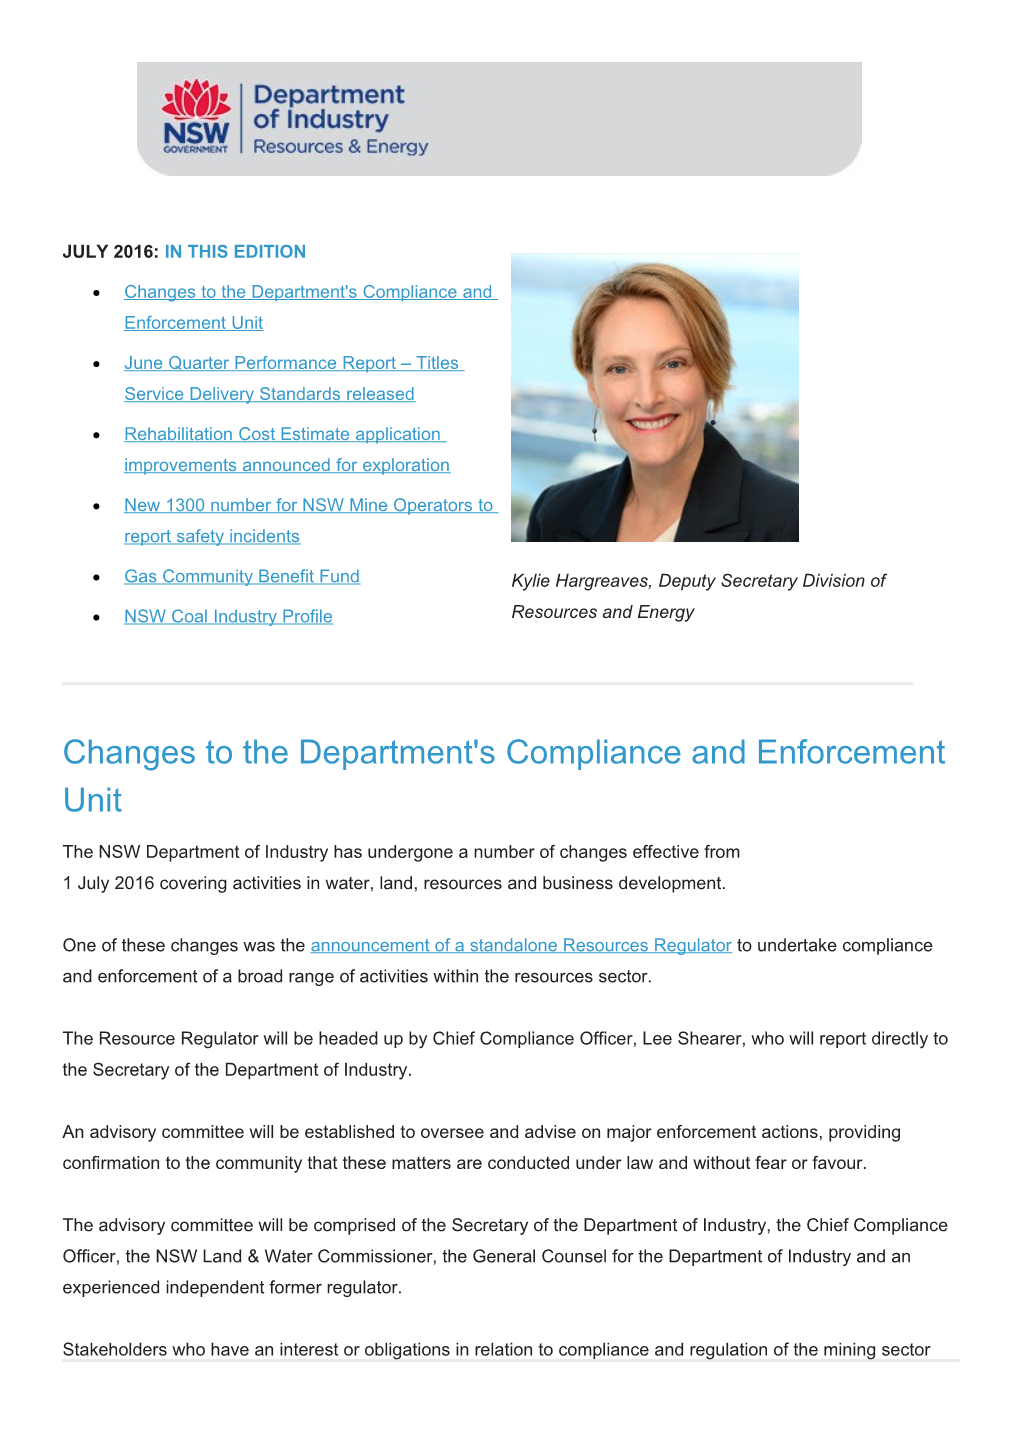 Changes to the Department's Compliance and Enforcement Unit